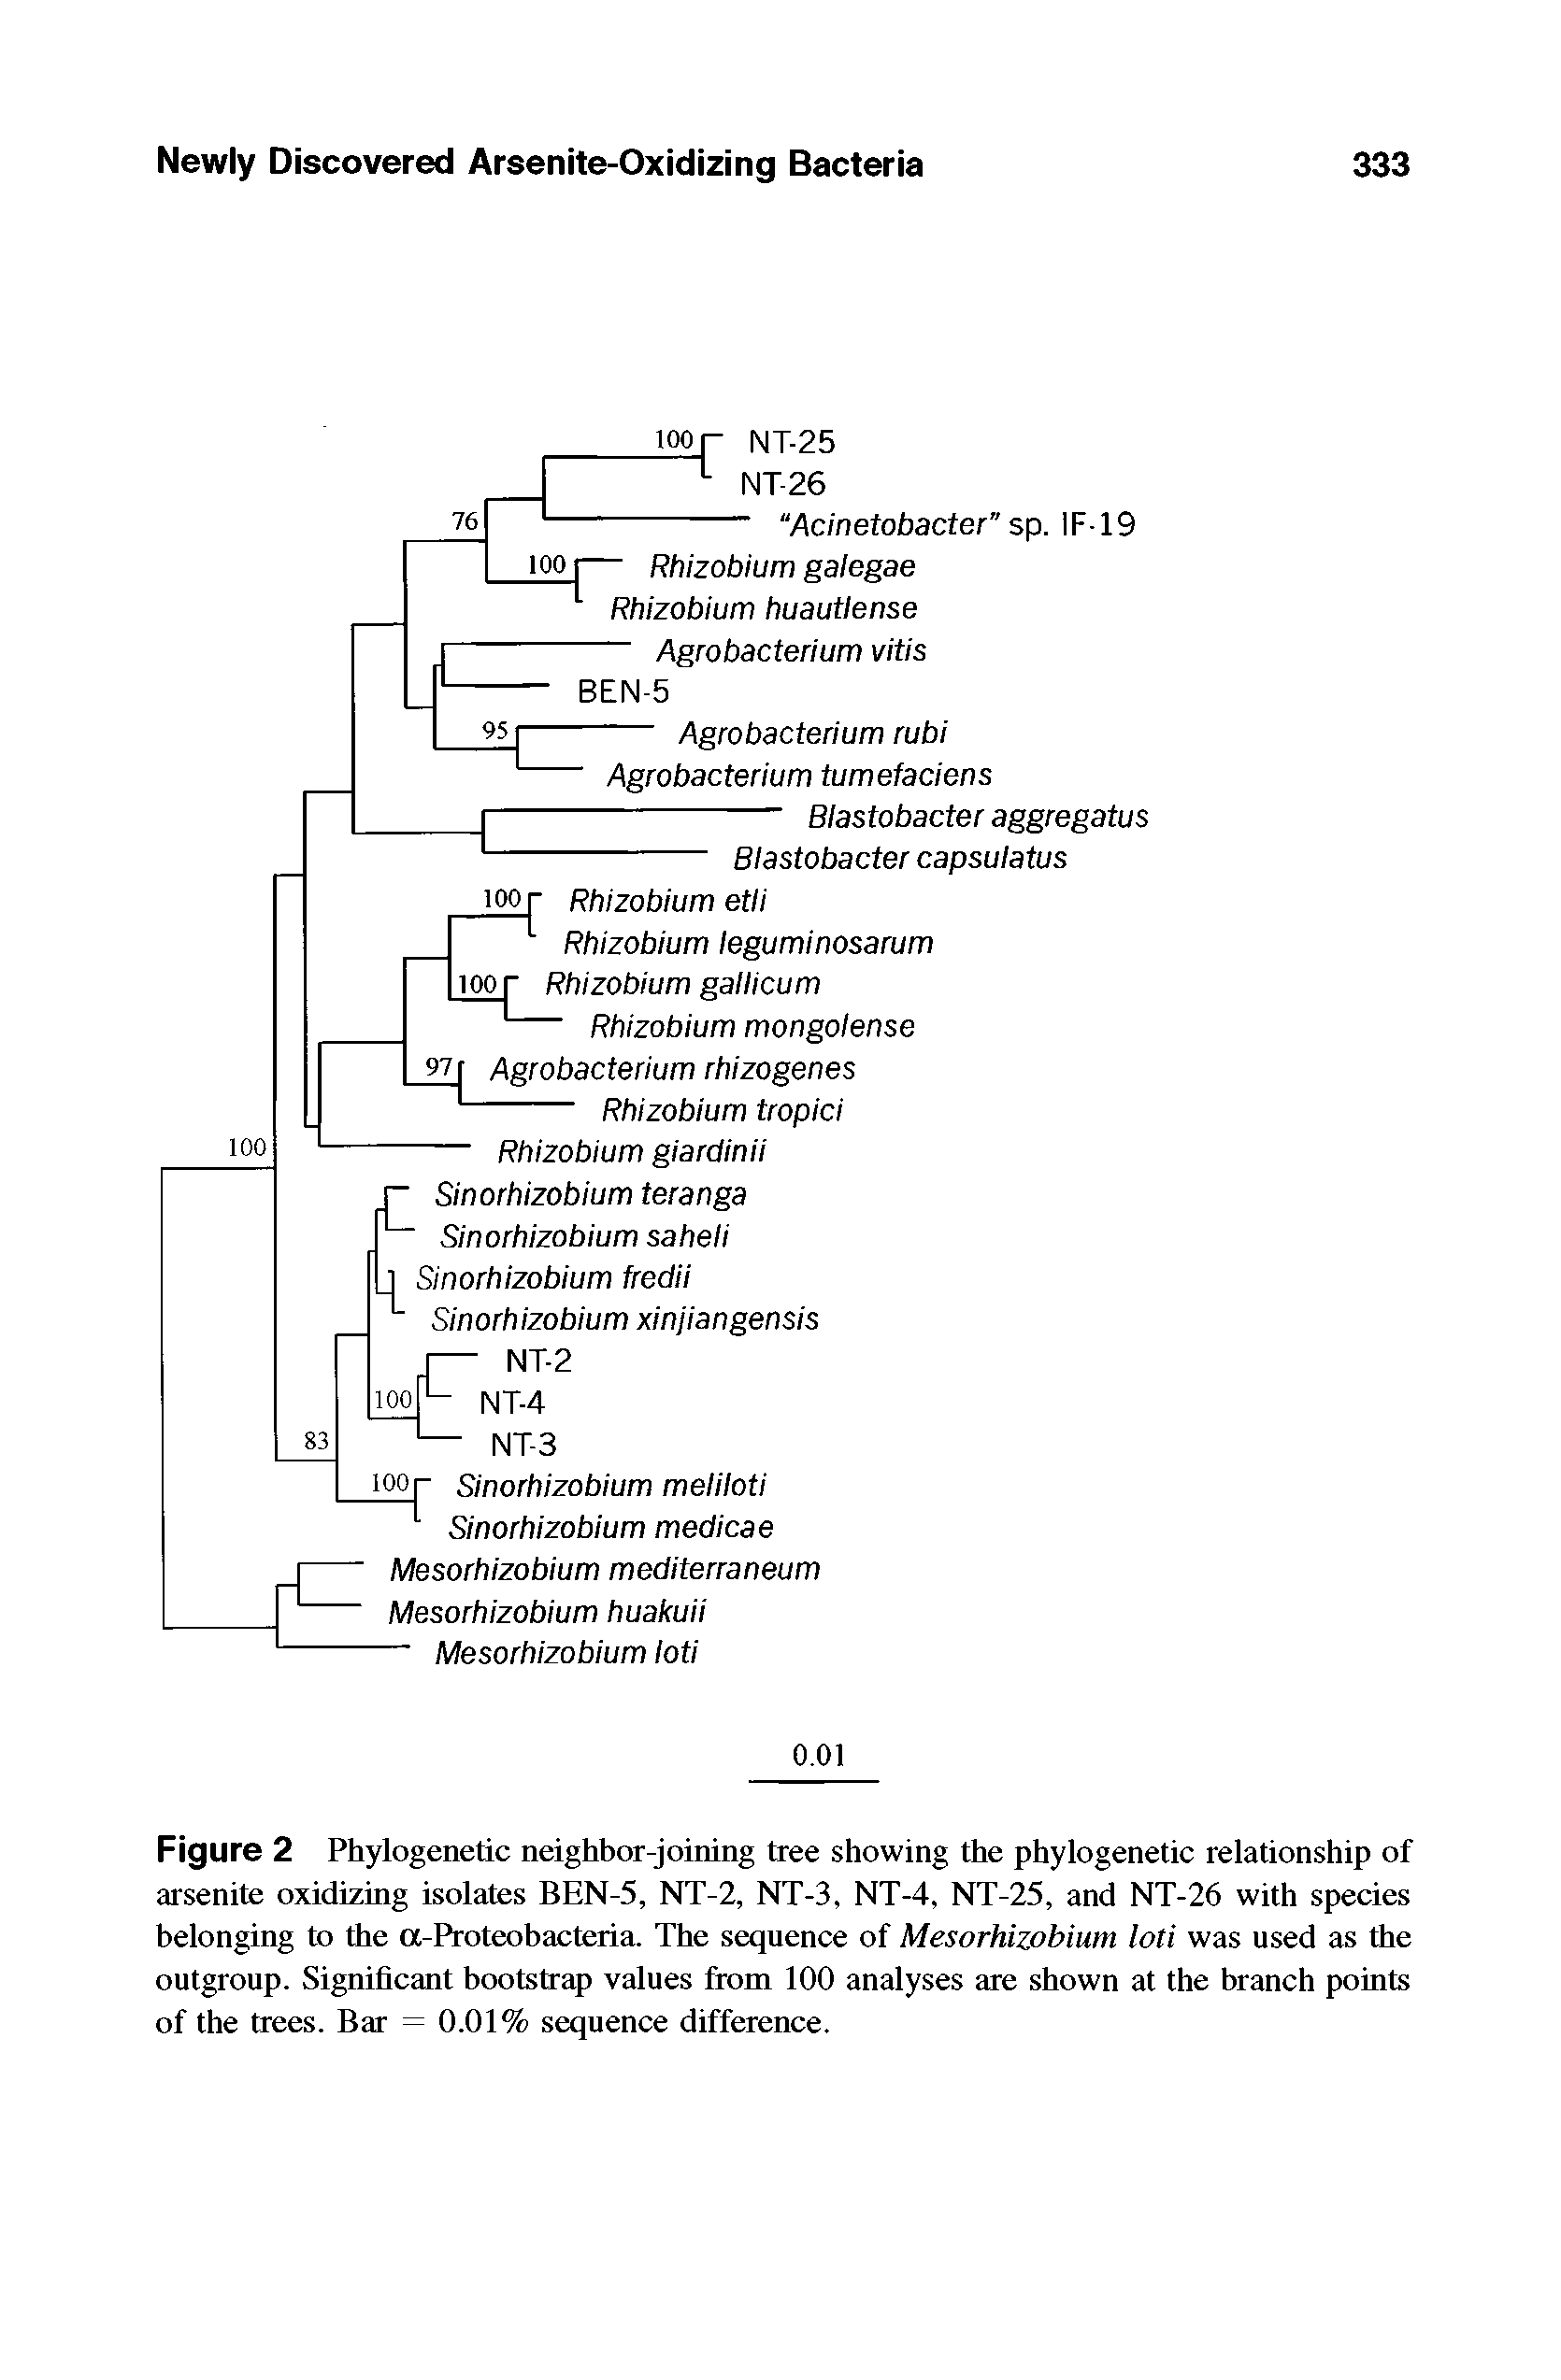 Figure 2 Phylogenetic neighbor-joining tree showing the phylogenetic relationship of arsenite oxidizing isolates BEN-5, NT-2, NT-3, NT-4, NT-25, and NT-26 with species belonging to the a-Proteobacteria. The sequence of Mesorhizobium loti was used as the outgroup. Significant bootstrap values from 100 analyses are shown at the branch points of the trees. Bar = 0.01% sequence difference.